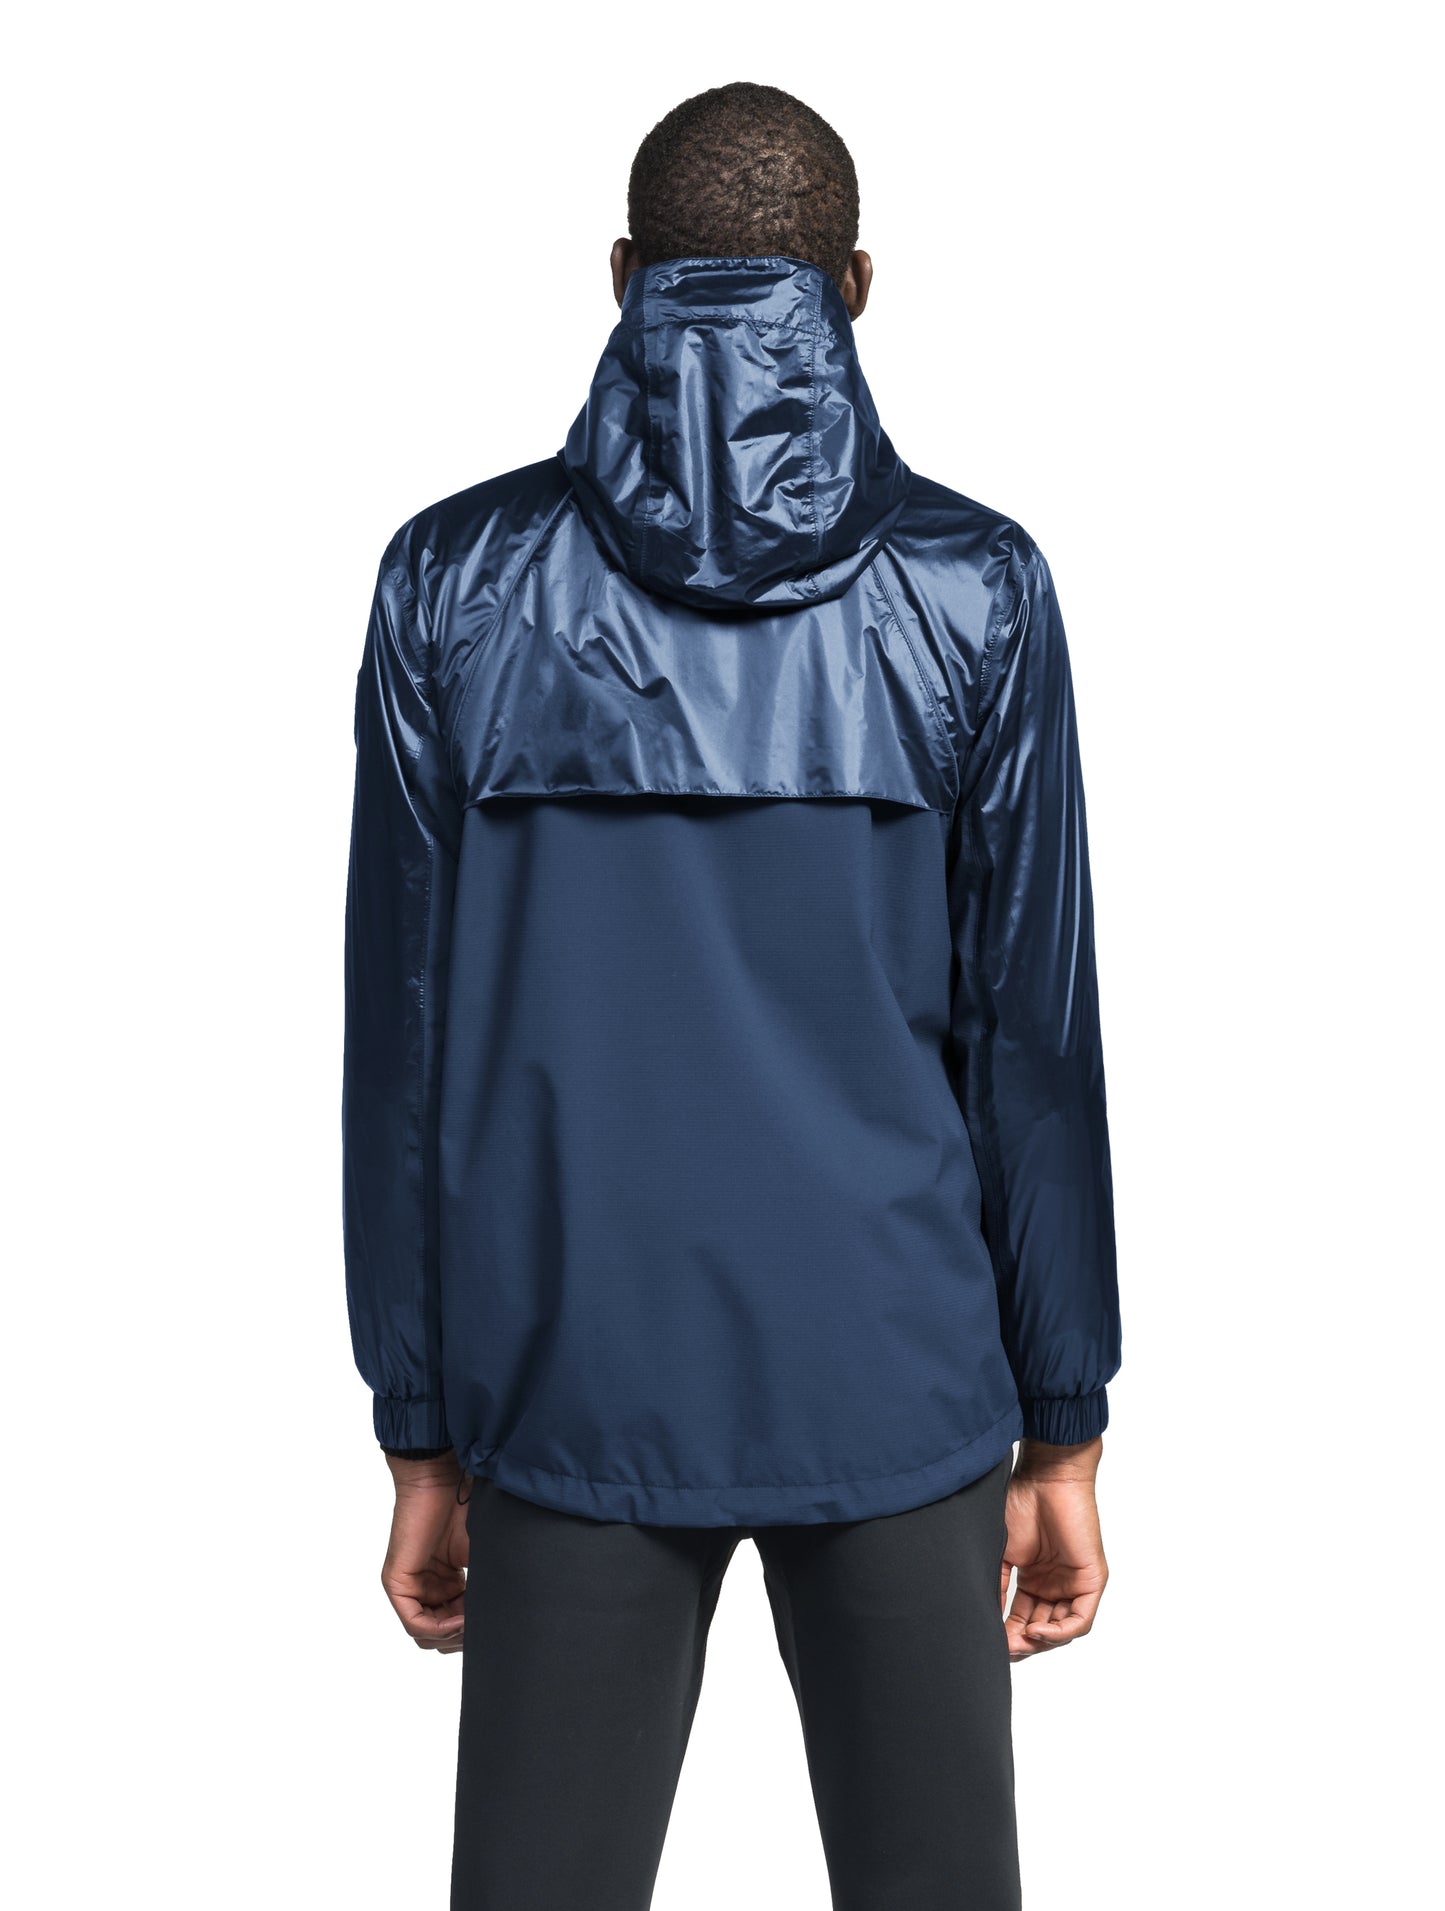 Stratus Men's Tailored Packable Rain Jacket in hip length, premium cire technical nylon taffeta and stretch ripstop fabrication, highly breathable mesh lining, hidden packable pocket, non-removable hood with adjustable draw cord, reflective piping along front and back, underarm grommets for extra breathability, back yoke with mesh ventilation, two waist zipper pockets, two interior zipper pockets, elastic cuffs with adjustable snap button, and adjustable interior draw cord at waist hem, in Marine